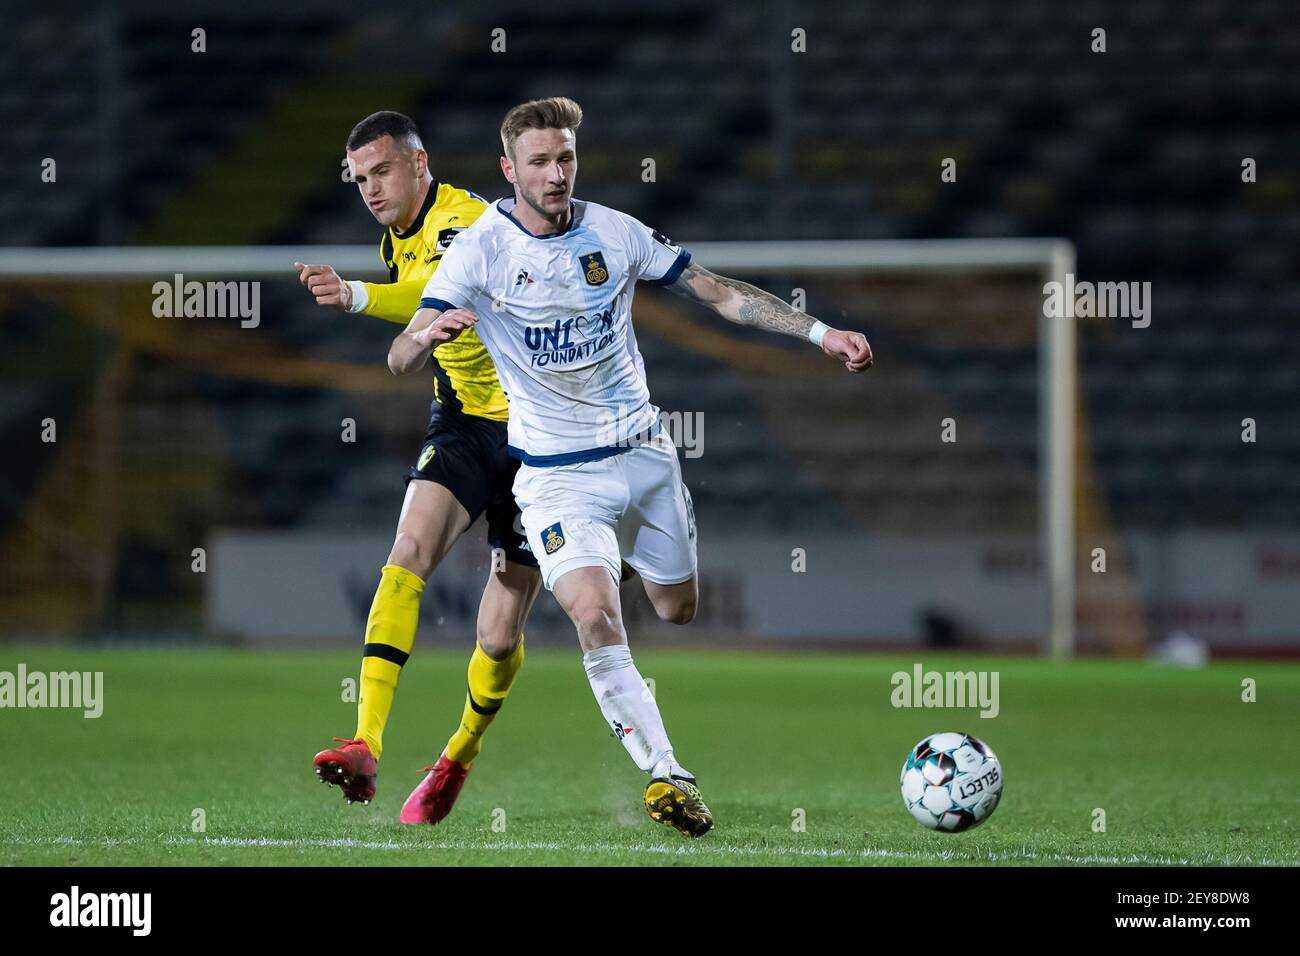 Lierse's Sava Petrov and Union's Siebe Van Der Heyden pictured in action during a soccer match between Lierse Kempenzonen and Union Saint-Gilloise, Fr Stock Photo